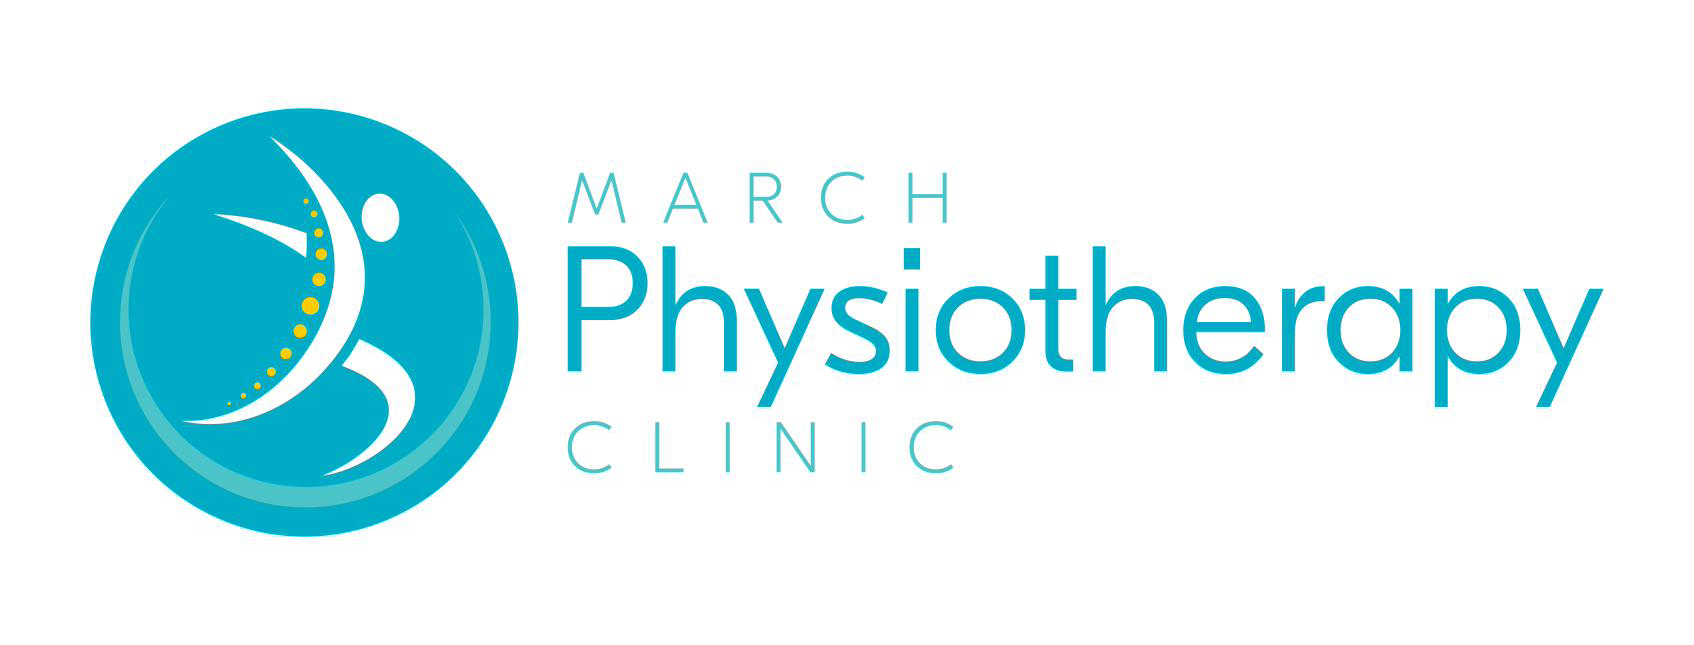 March Physiotherapy Clinic logo